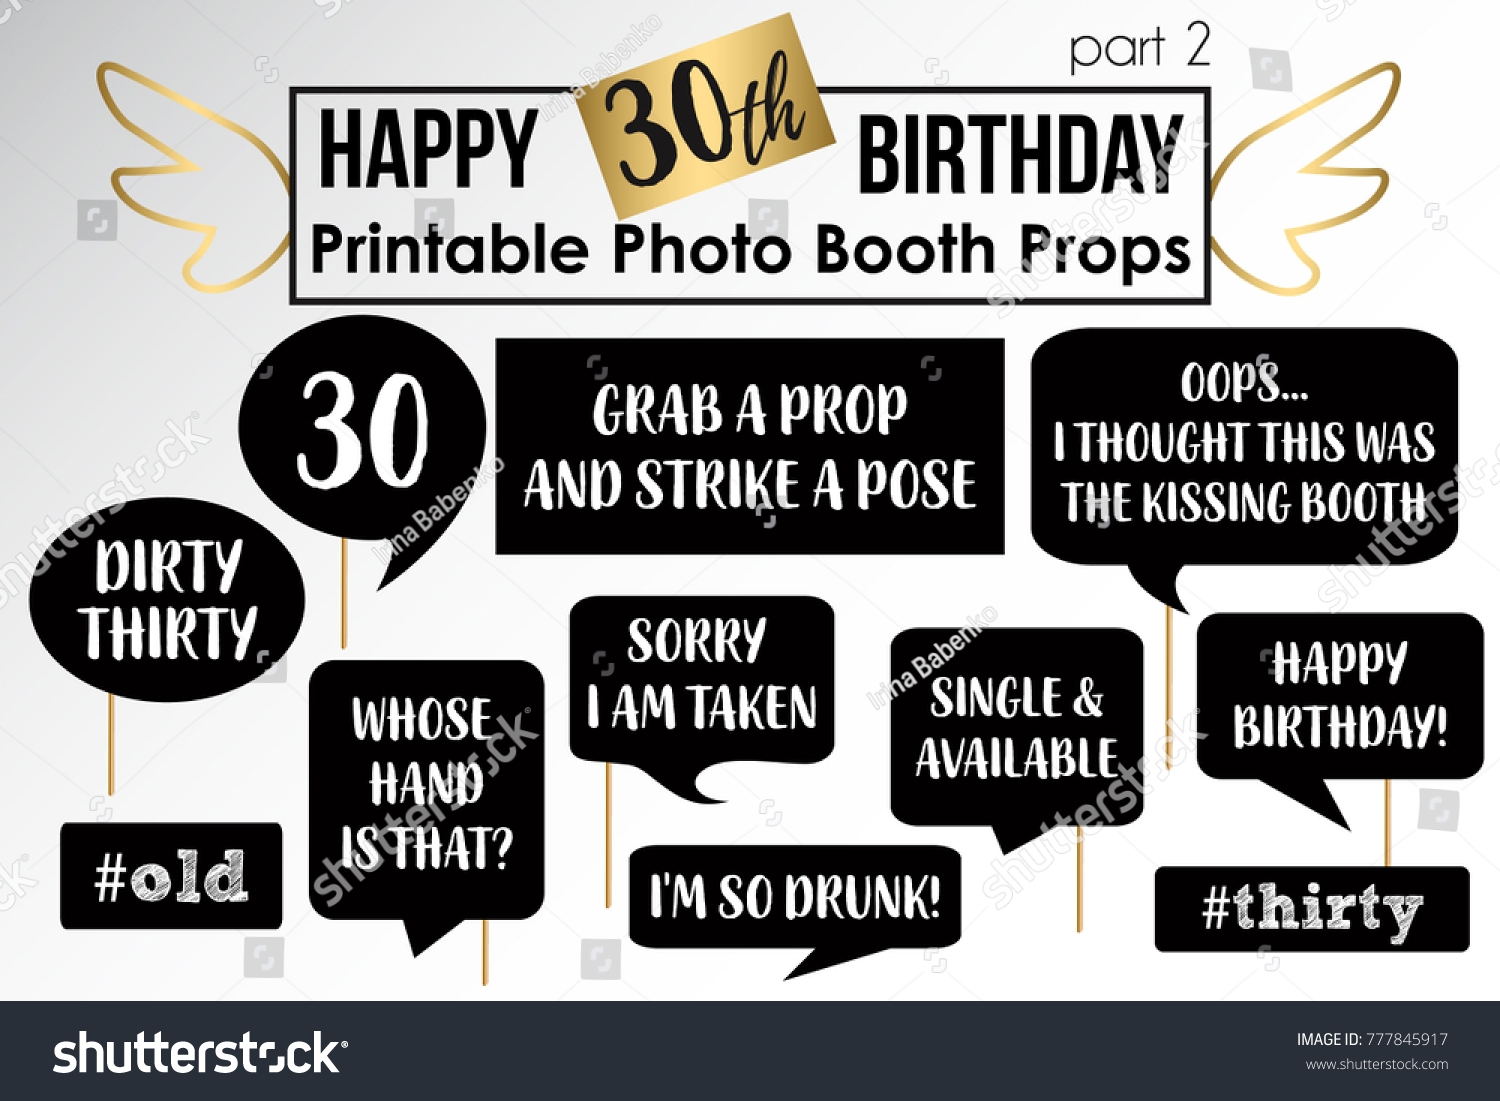 Thirtieth Birthday Party Printable Photo Booth Stock Vector Royalty Free 777845917 Shutterstock - Free Printable 30Th Birthday Photo Booth Props